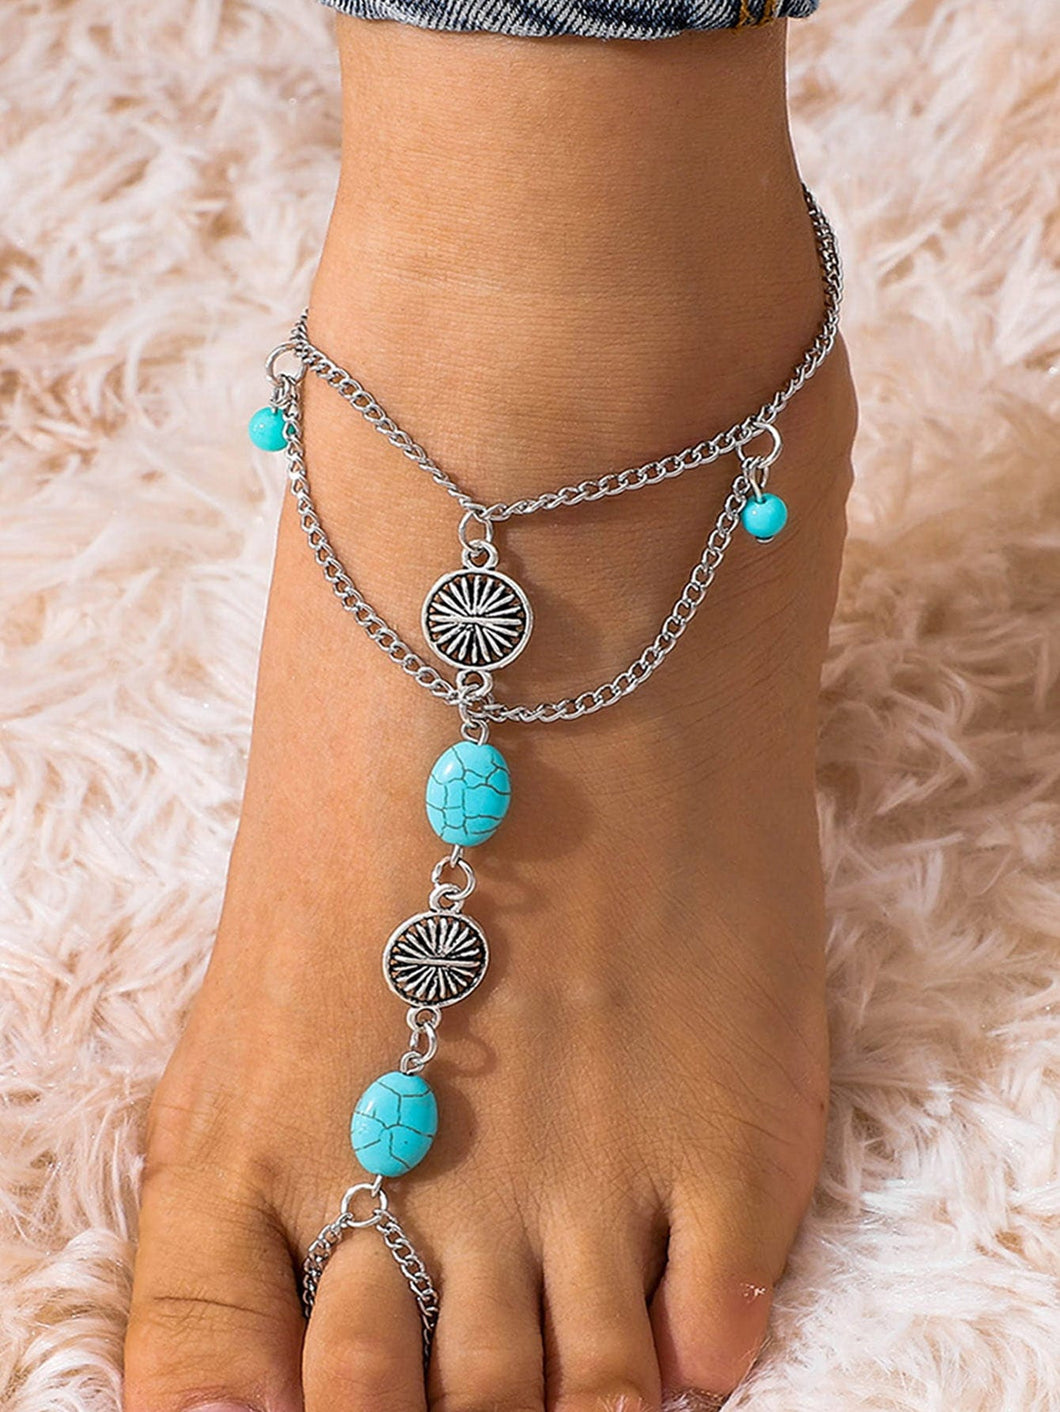 Turquoise Bead Toe Ring Anklet